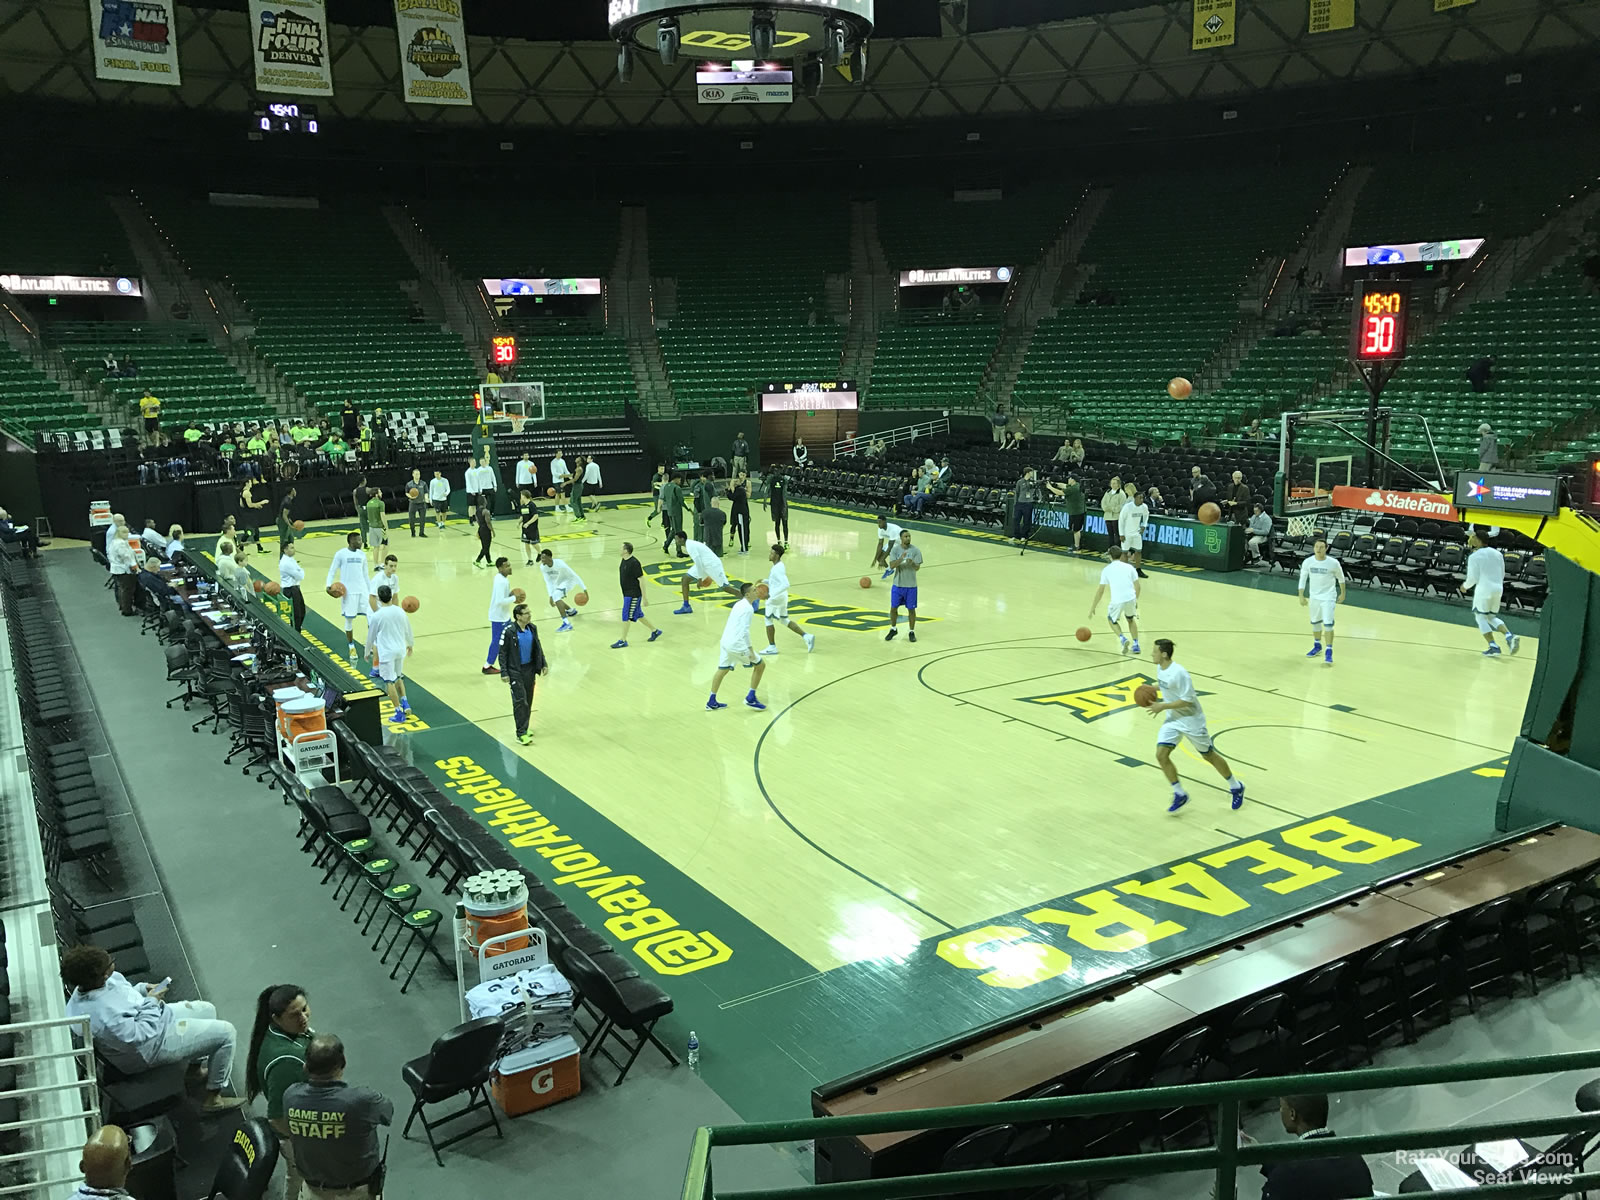 section 109, row 10 seat view  - ferrell center